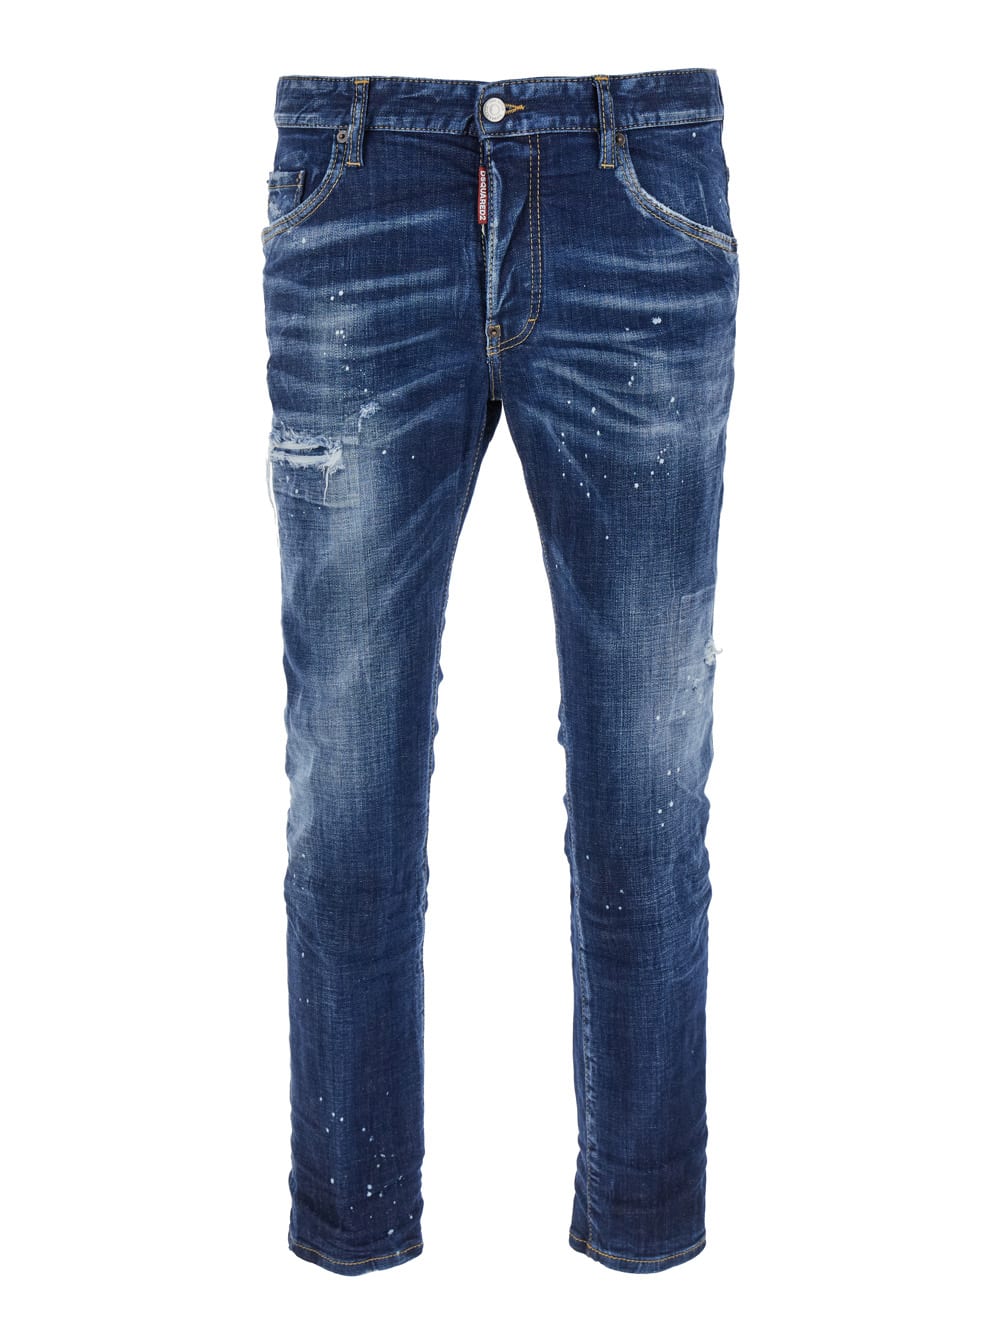 skater Blue Skinny Jeans With Paint Stains In Stretch Cotton Denim Man